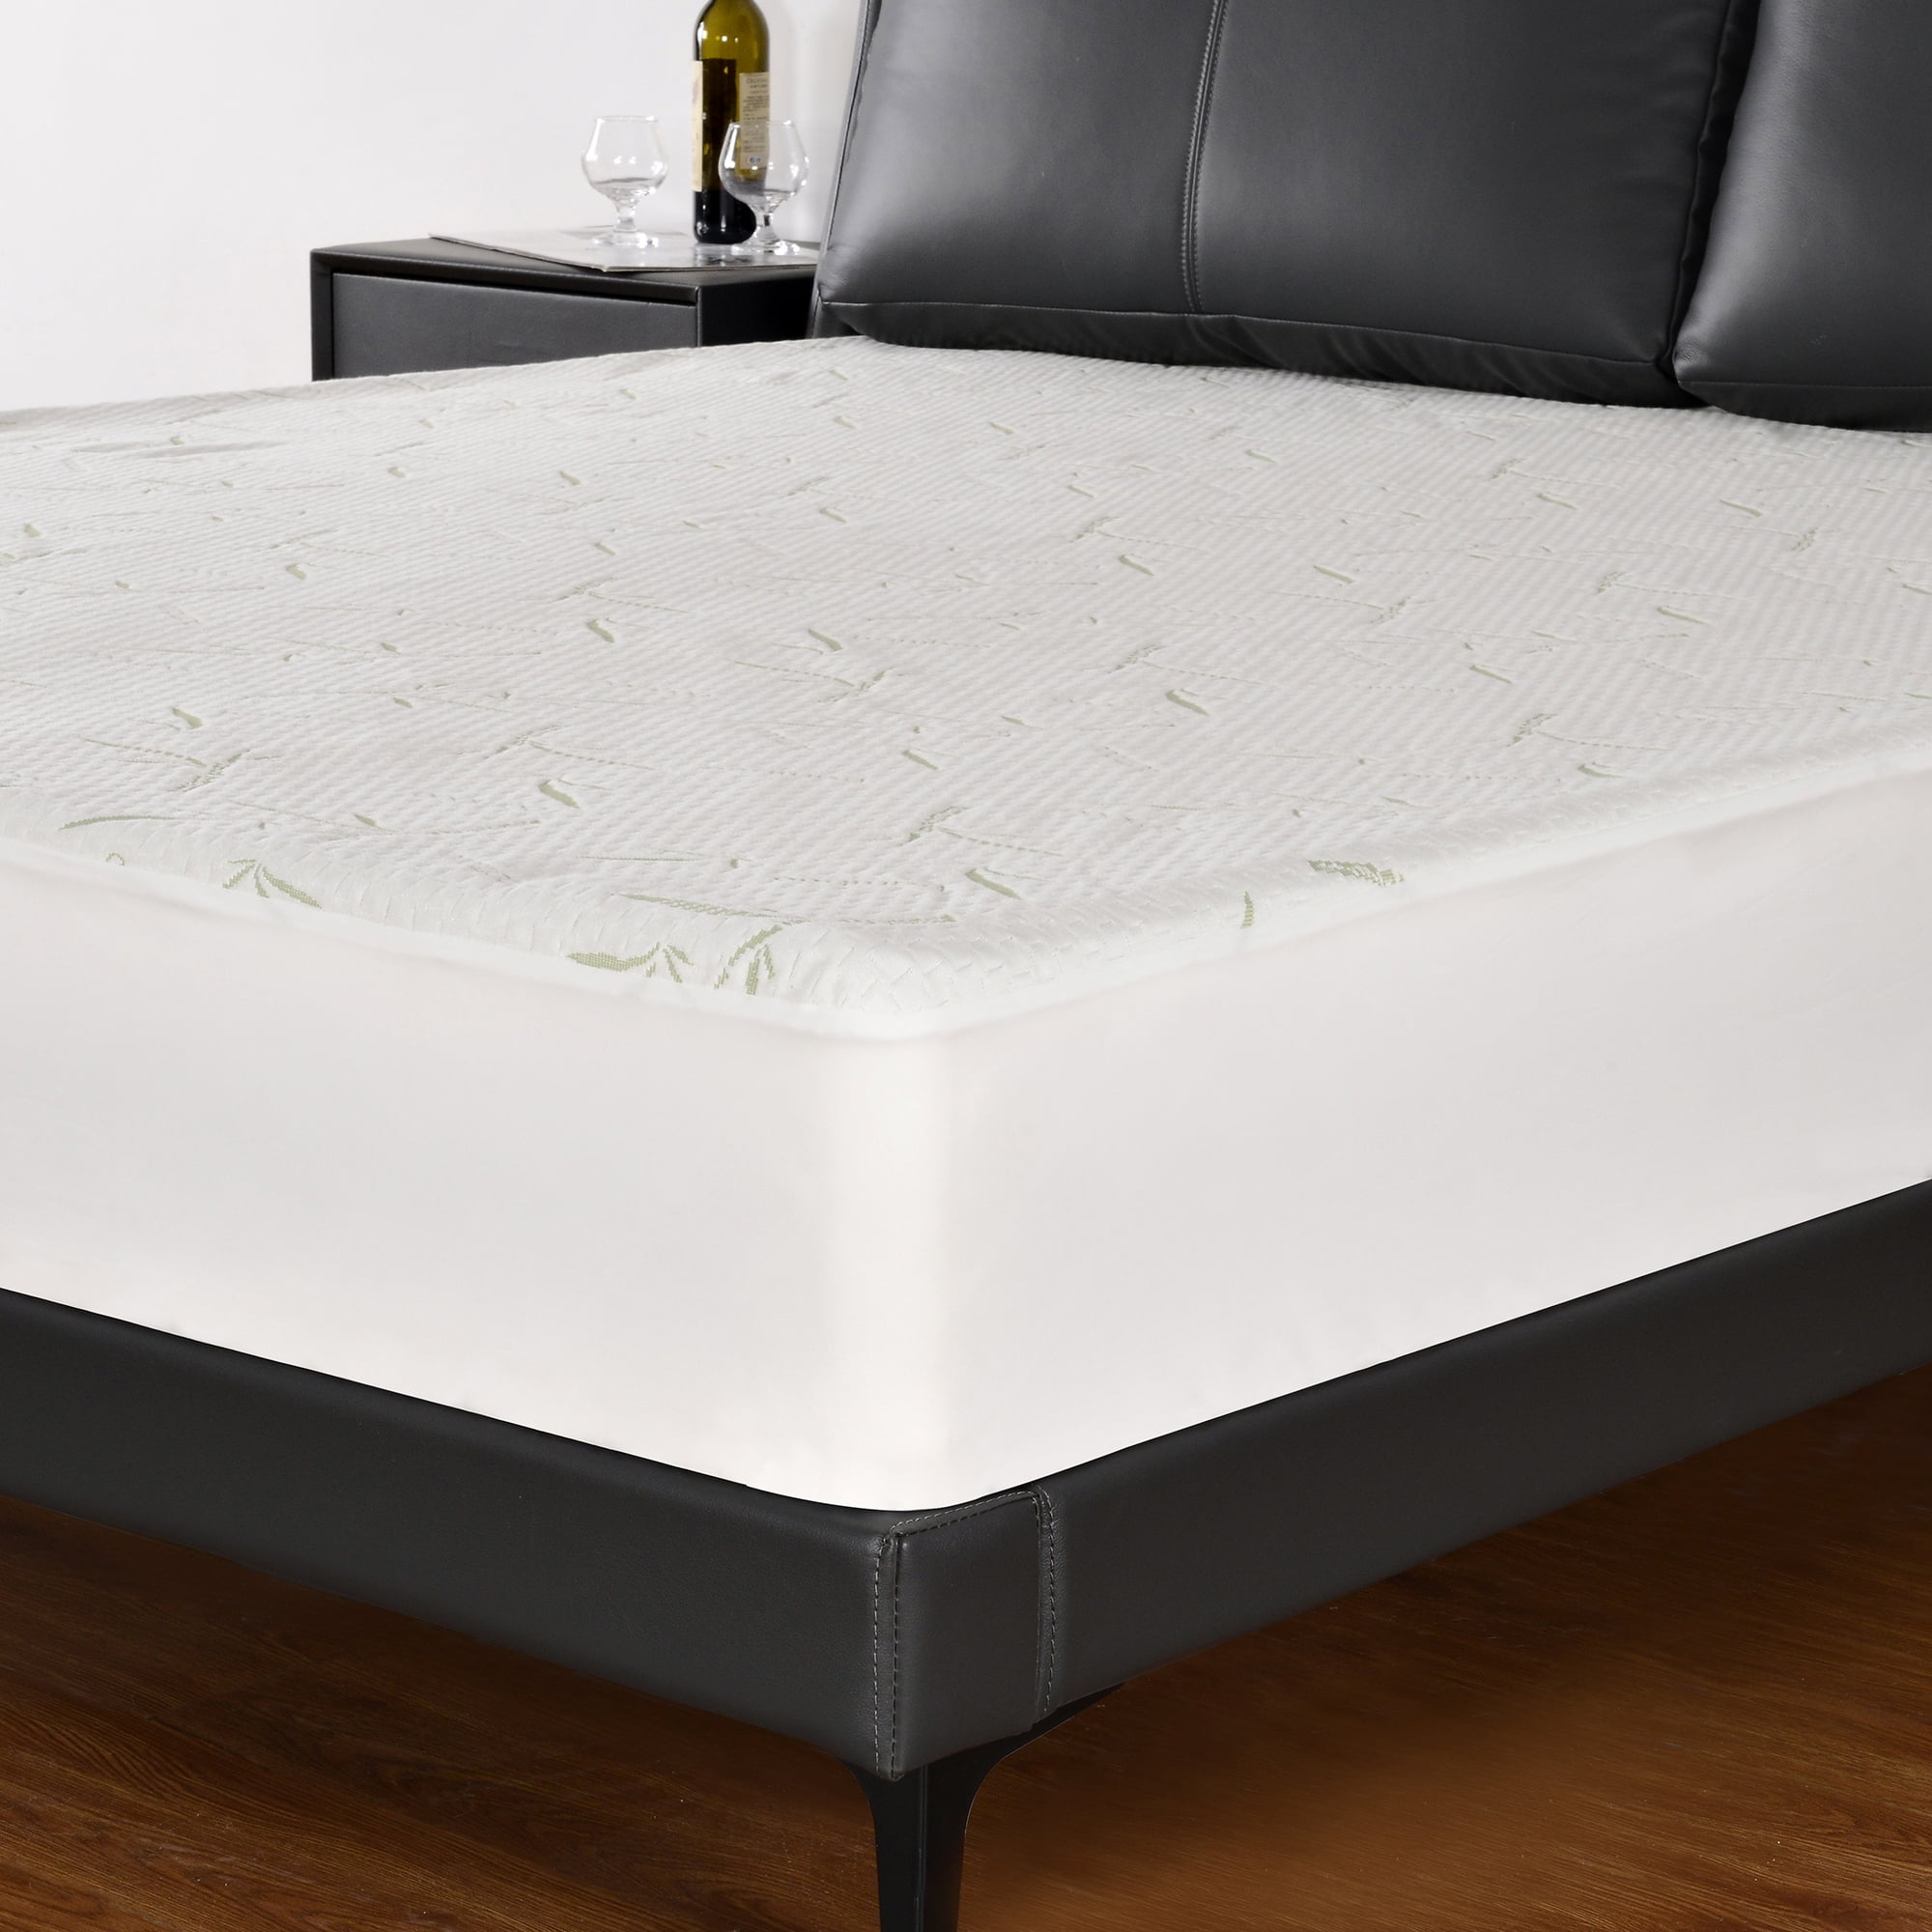 Details about   Waterproof Bamboo Mattress Protector Cooling Fitted Cover Deep Pocket Bed Pad 